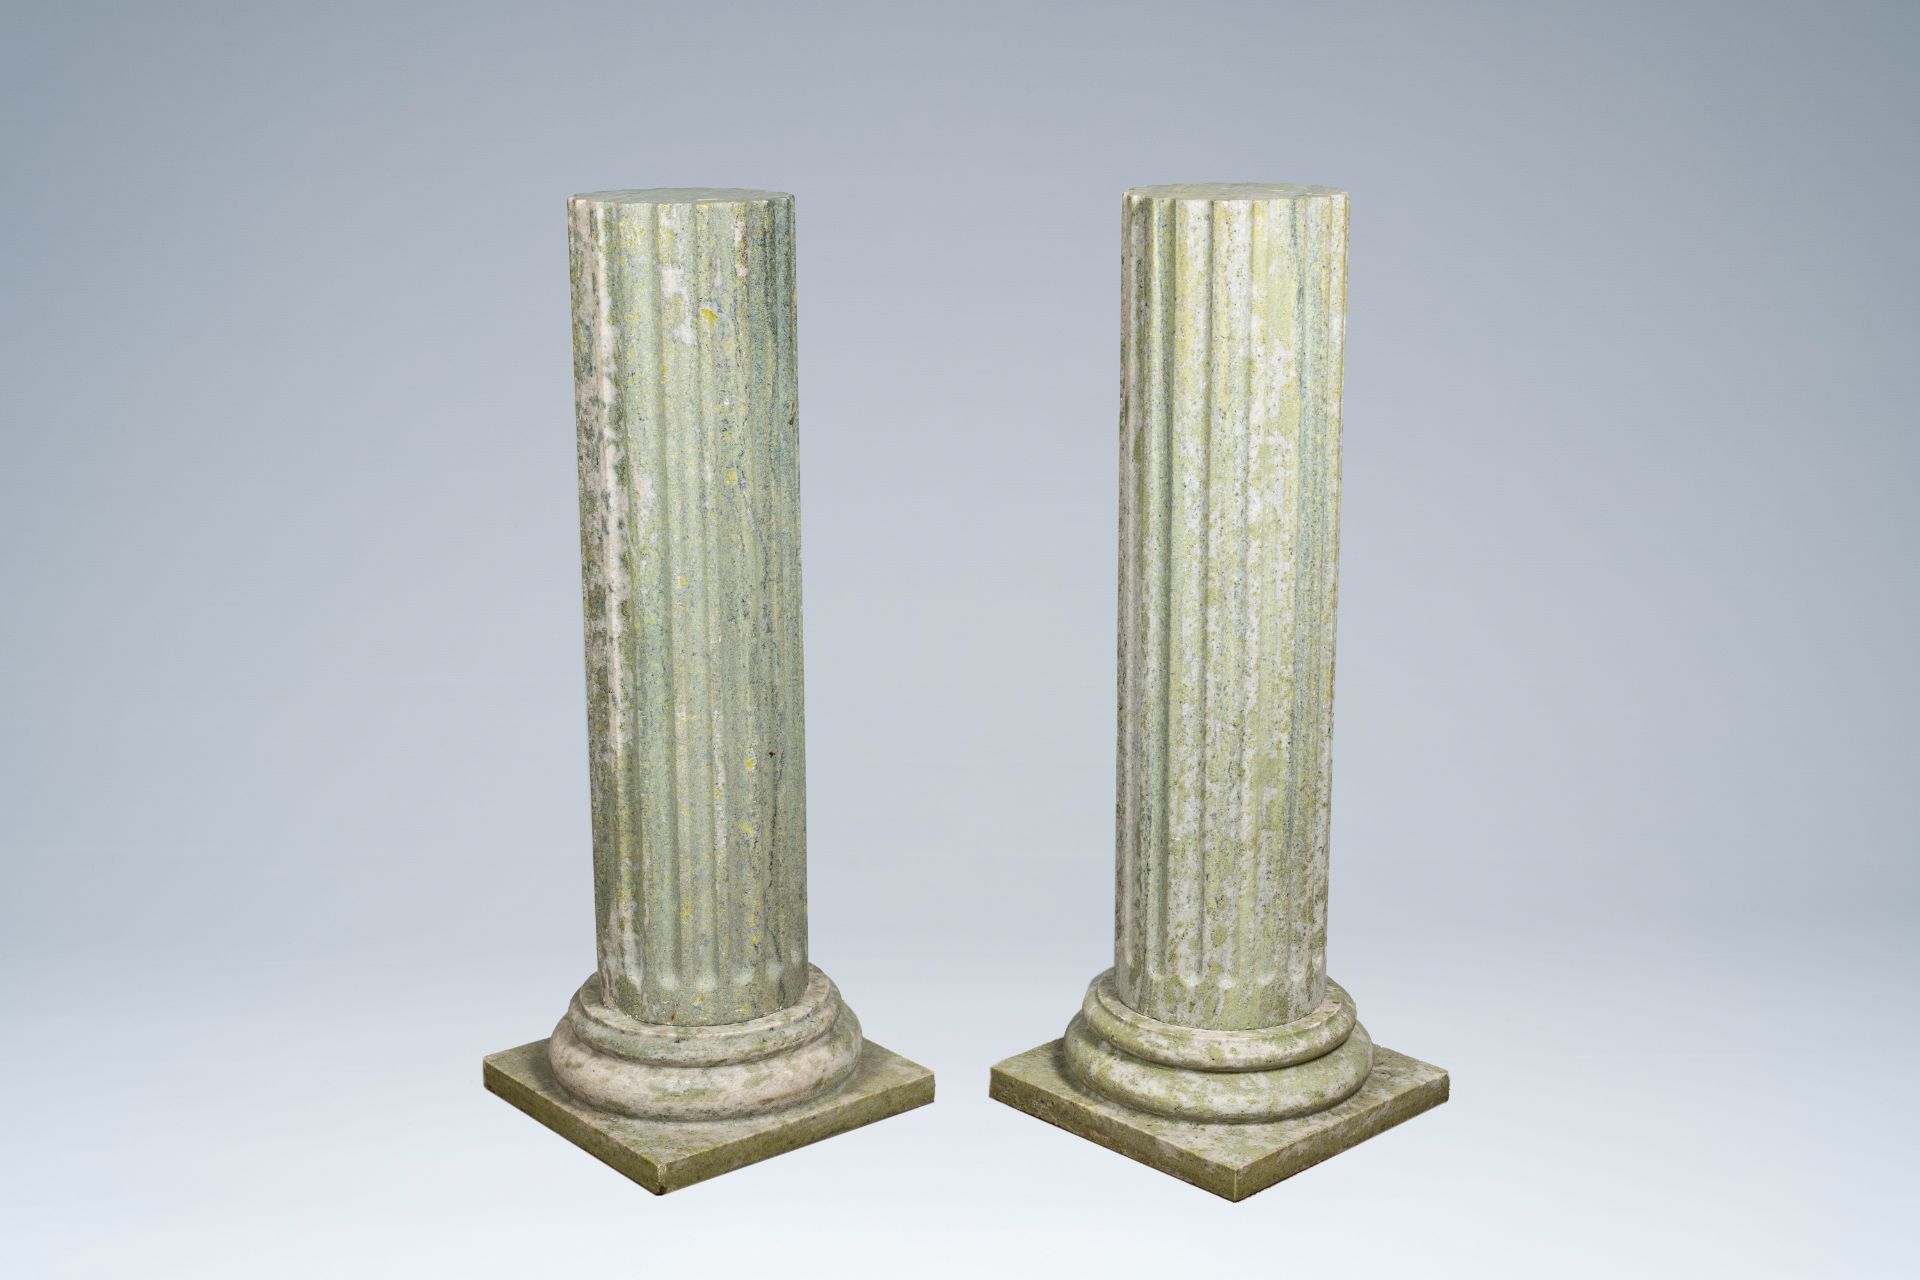 A pair of light green natural stone fluted columns, 20th C.